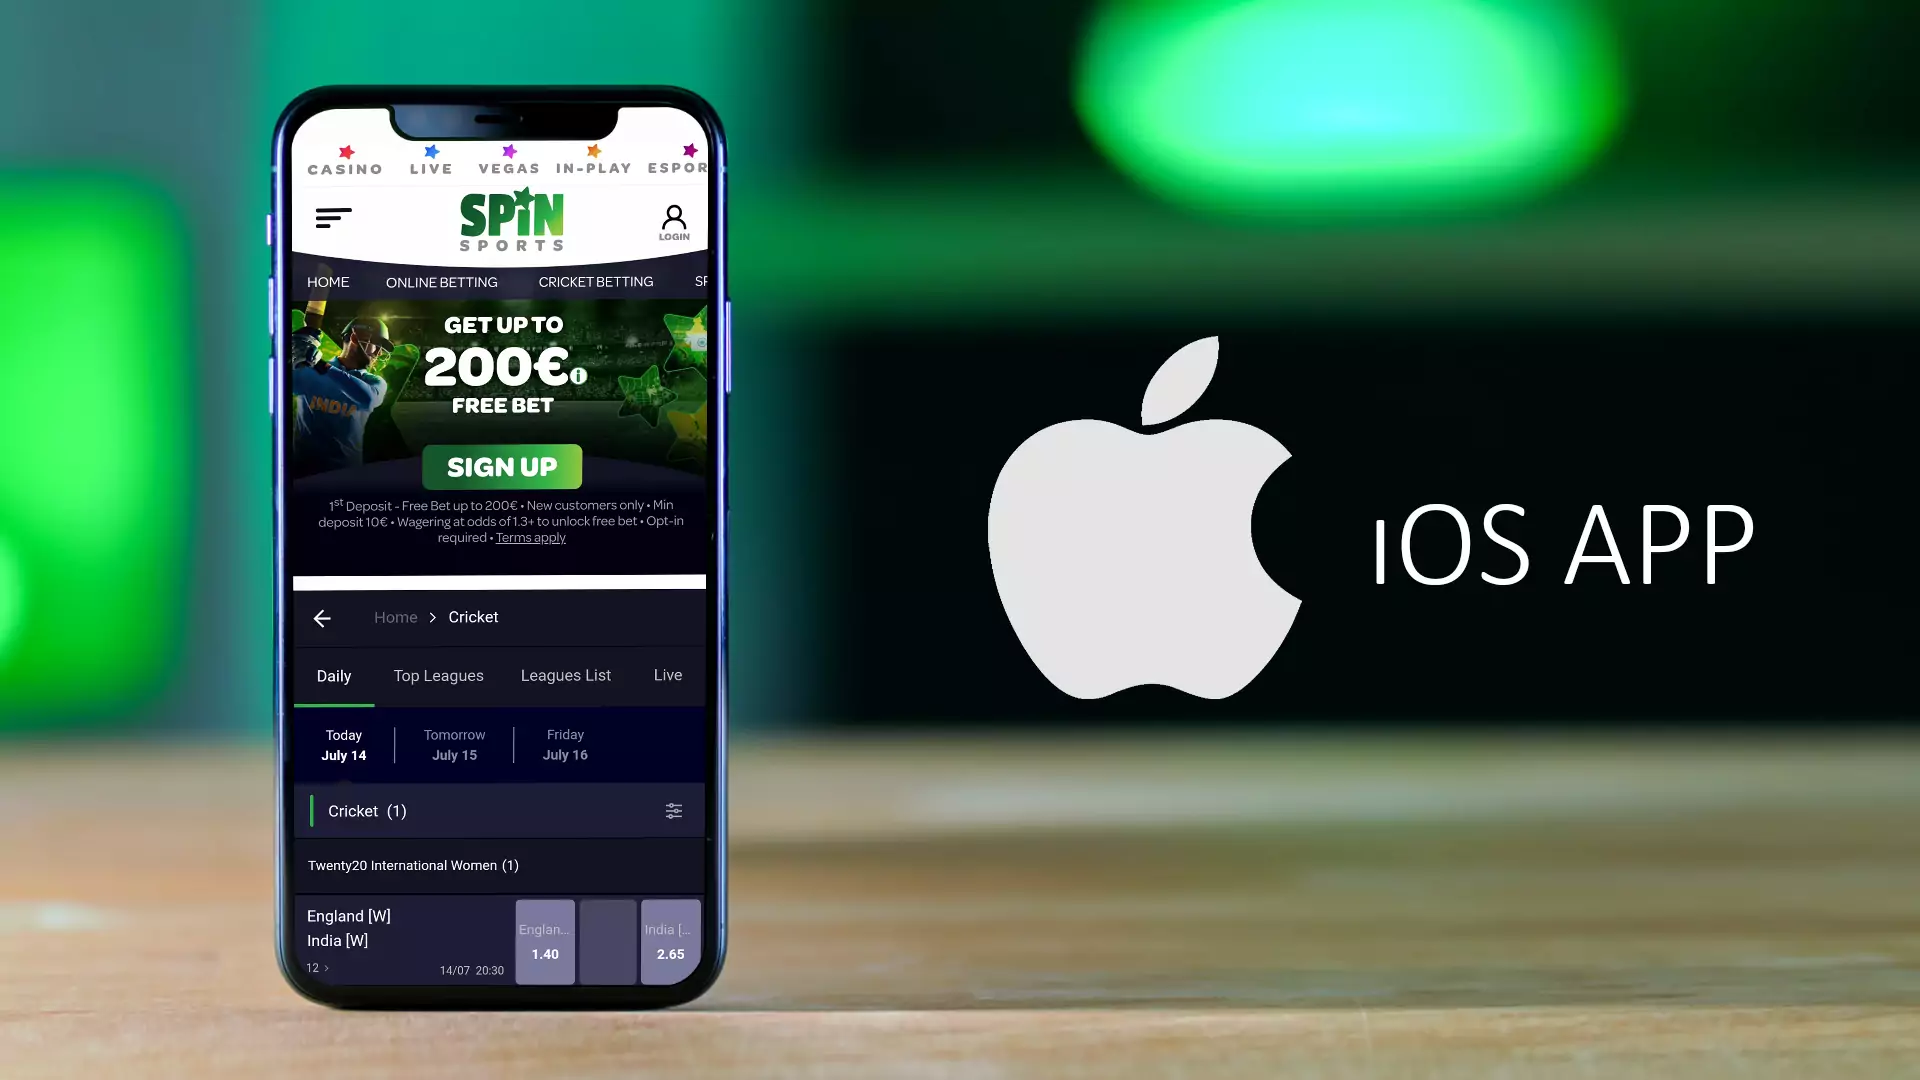 Download the last iOS version of the Spin Sports mobile app from the official site.